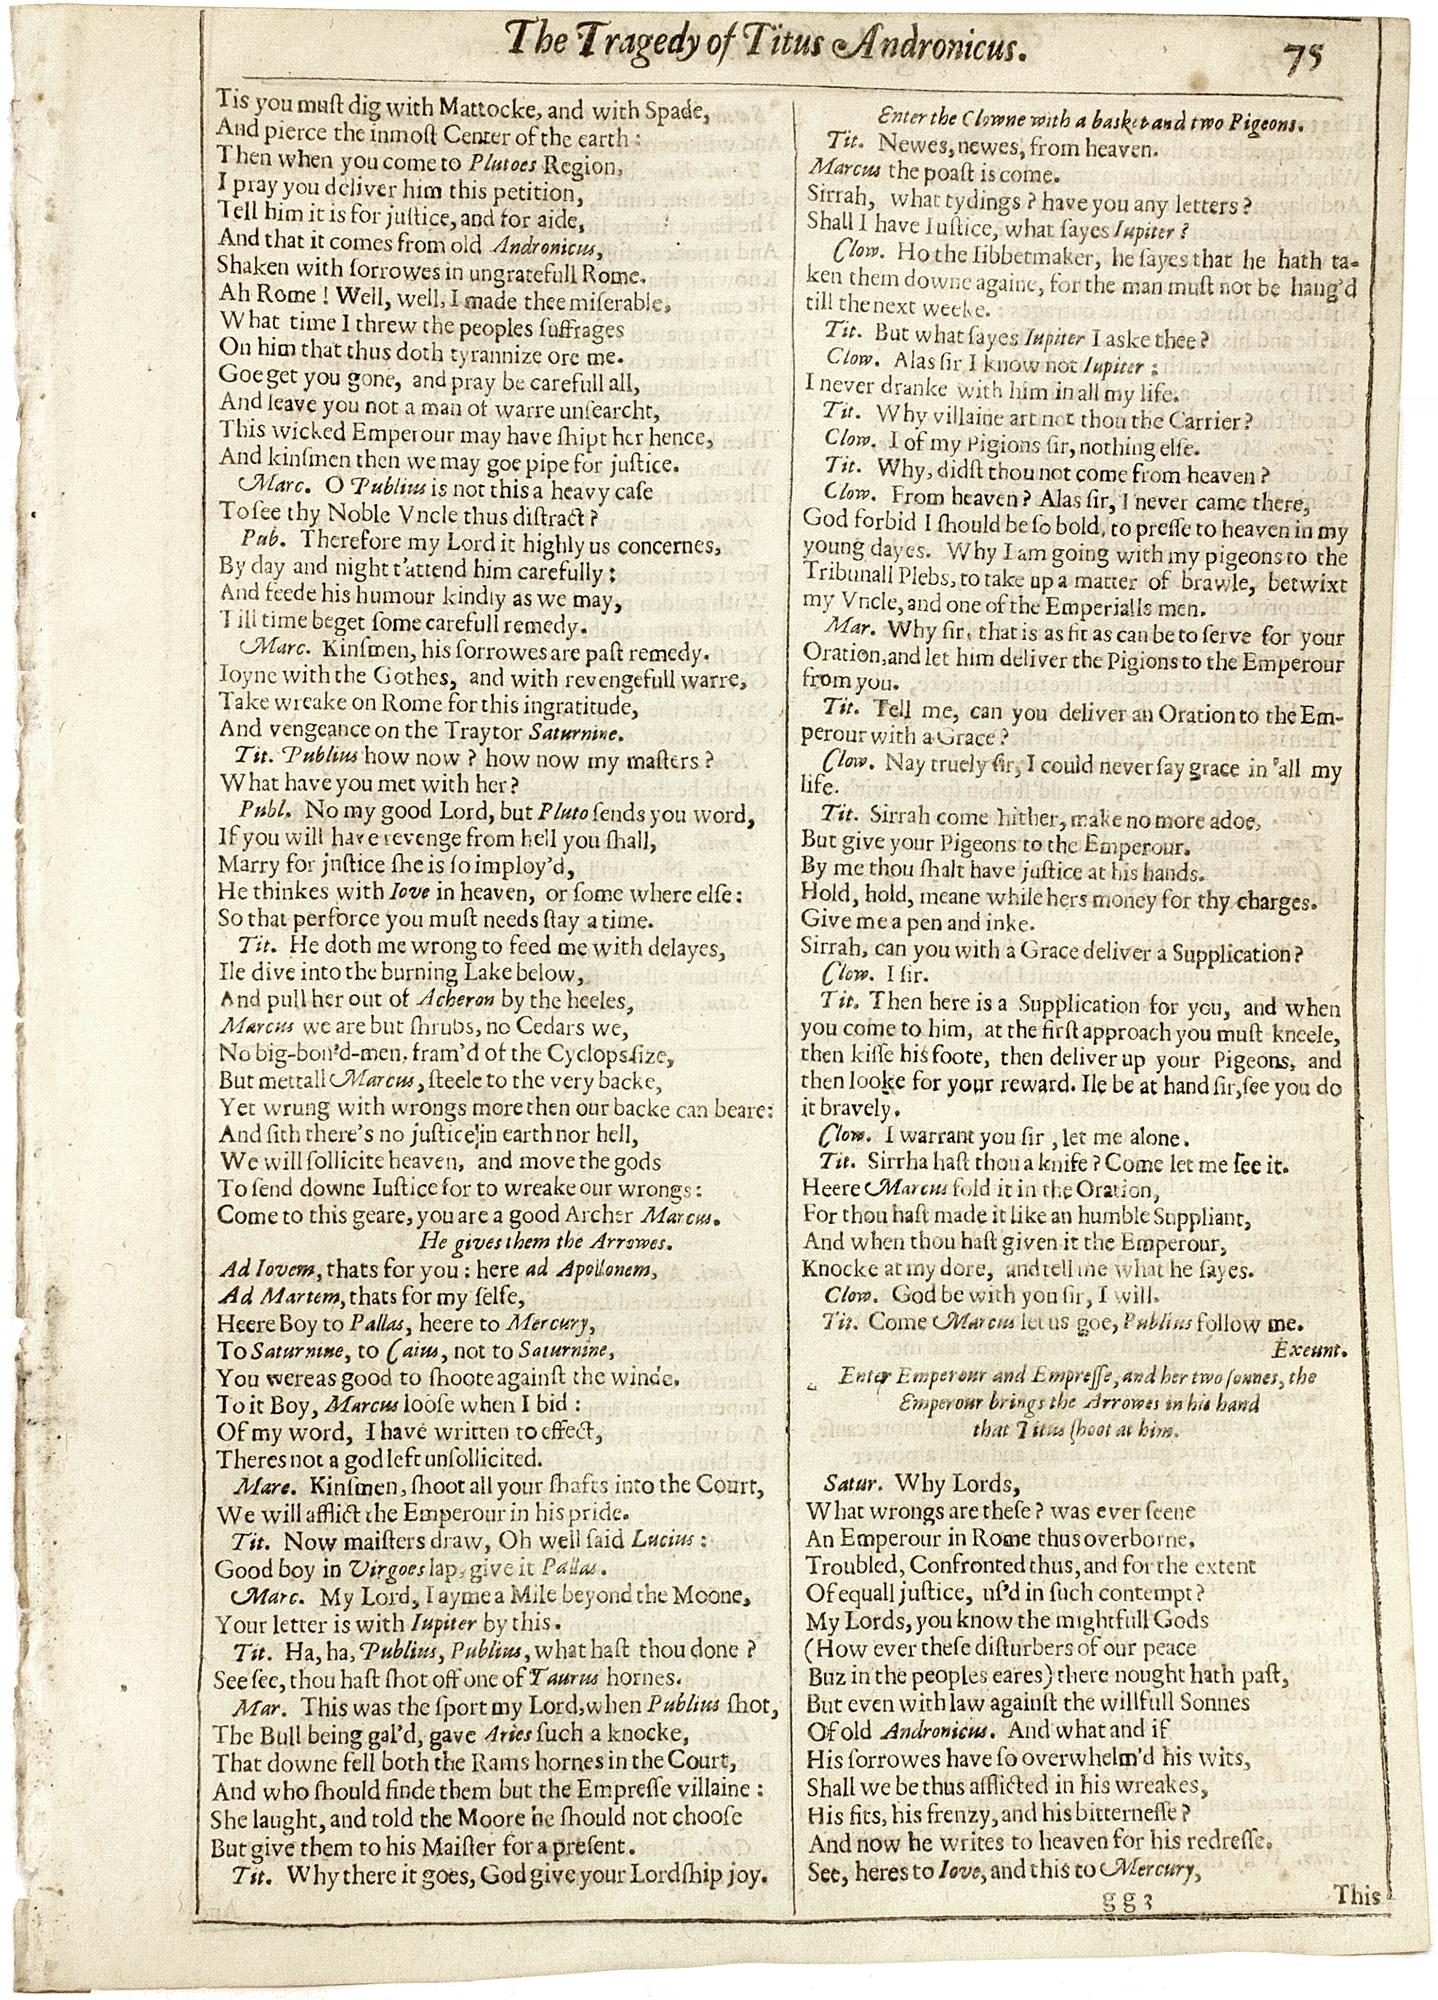 British Works of William Shakespeare. 1632 - (Tragedy of Titus Andronicus) - page 75-76 For Sale